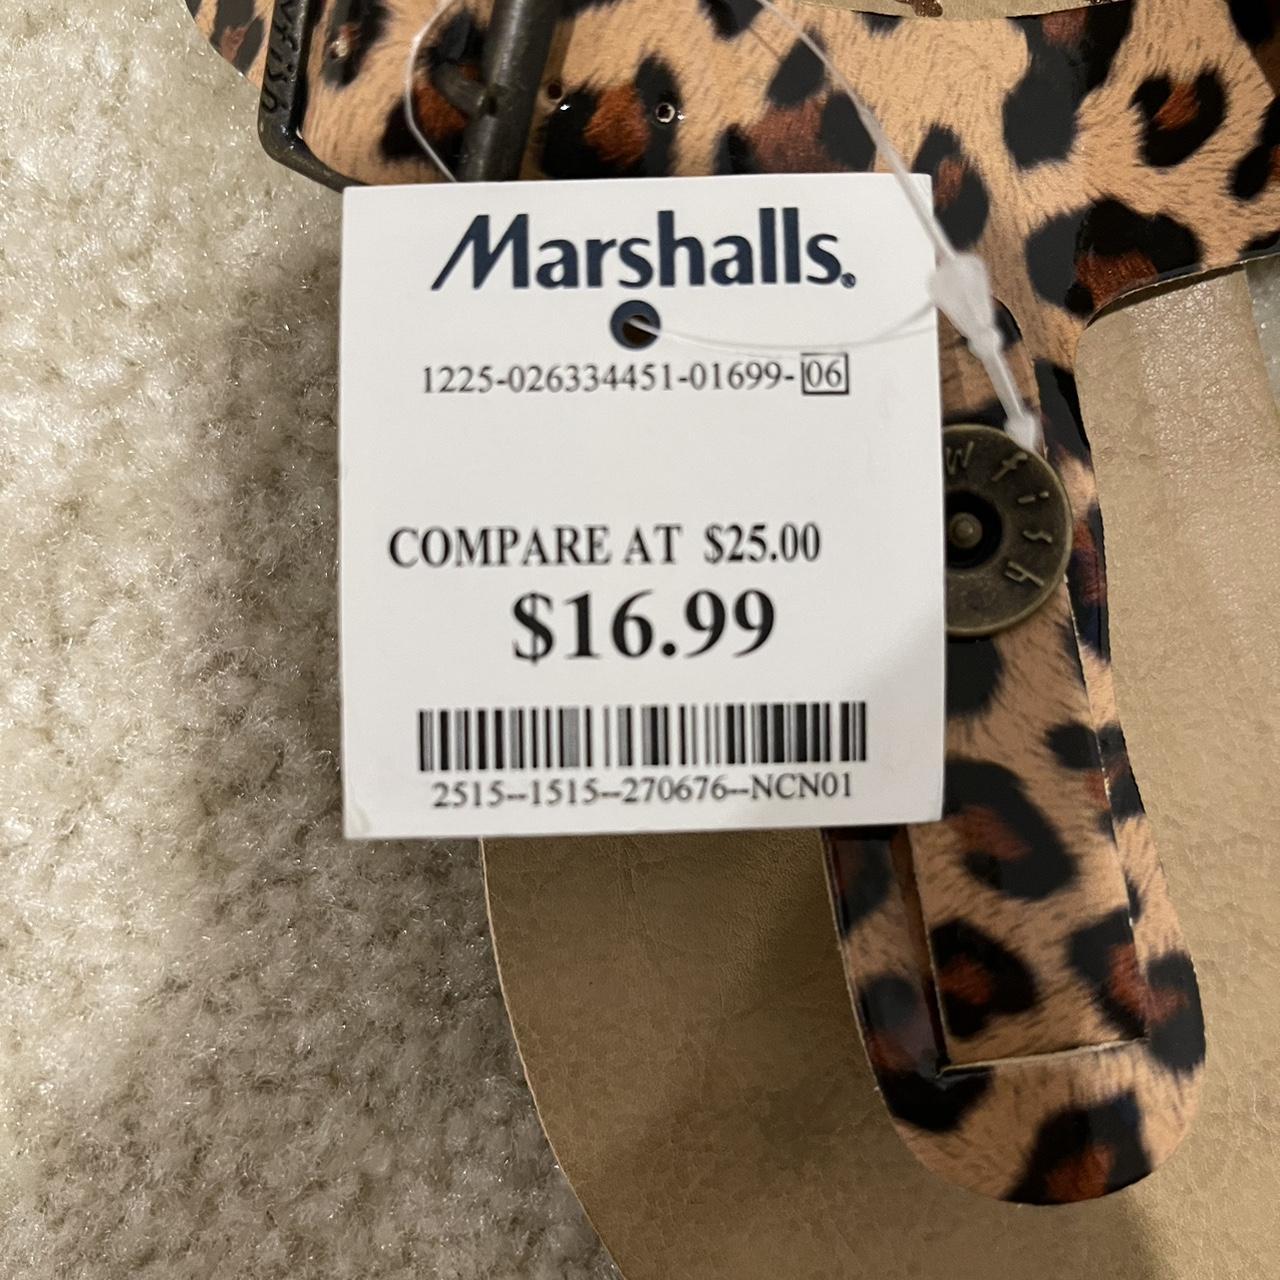 20 affordable summer styles to shop from Marshalls and T.J. Maxx